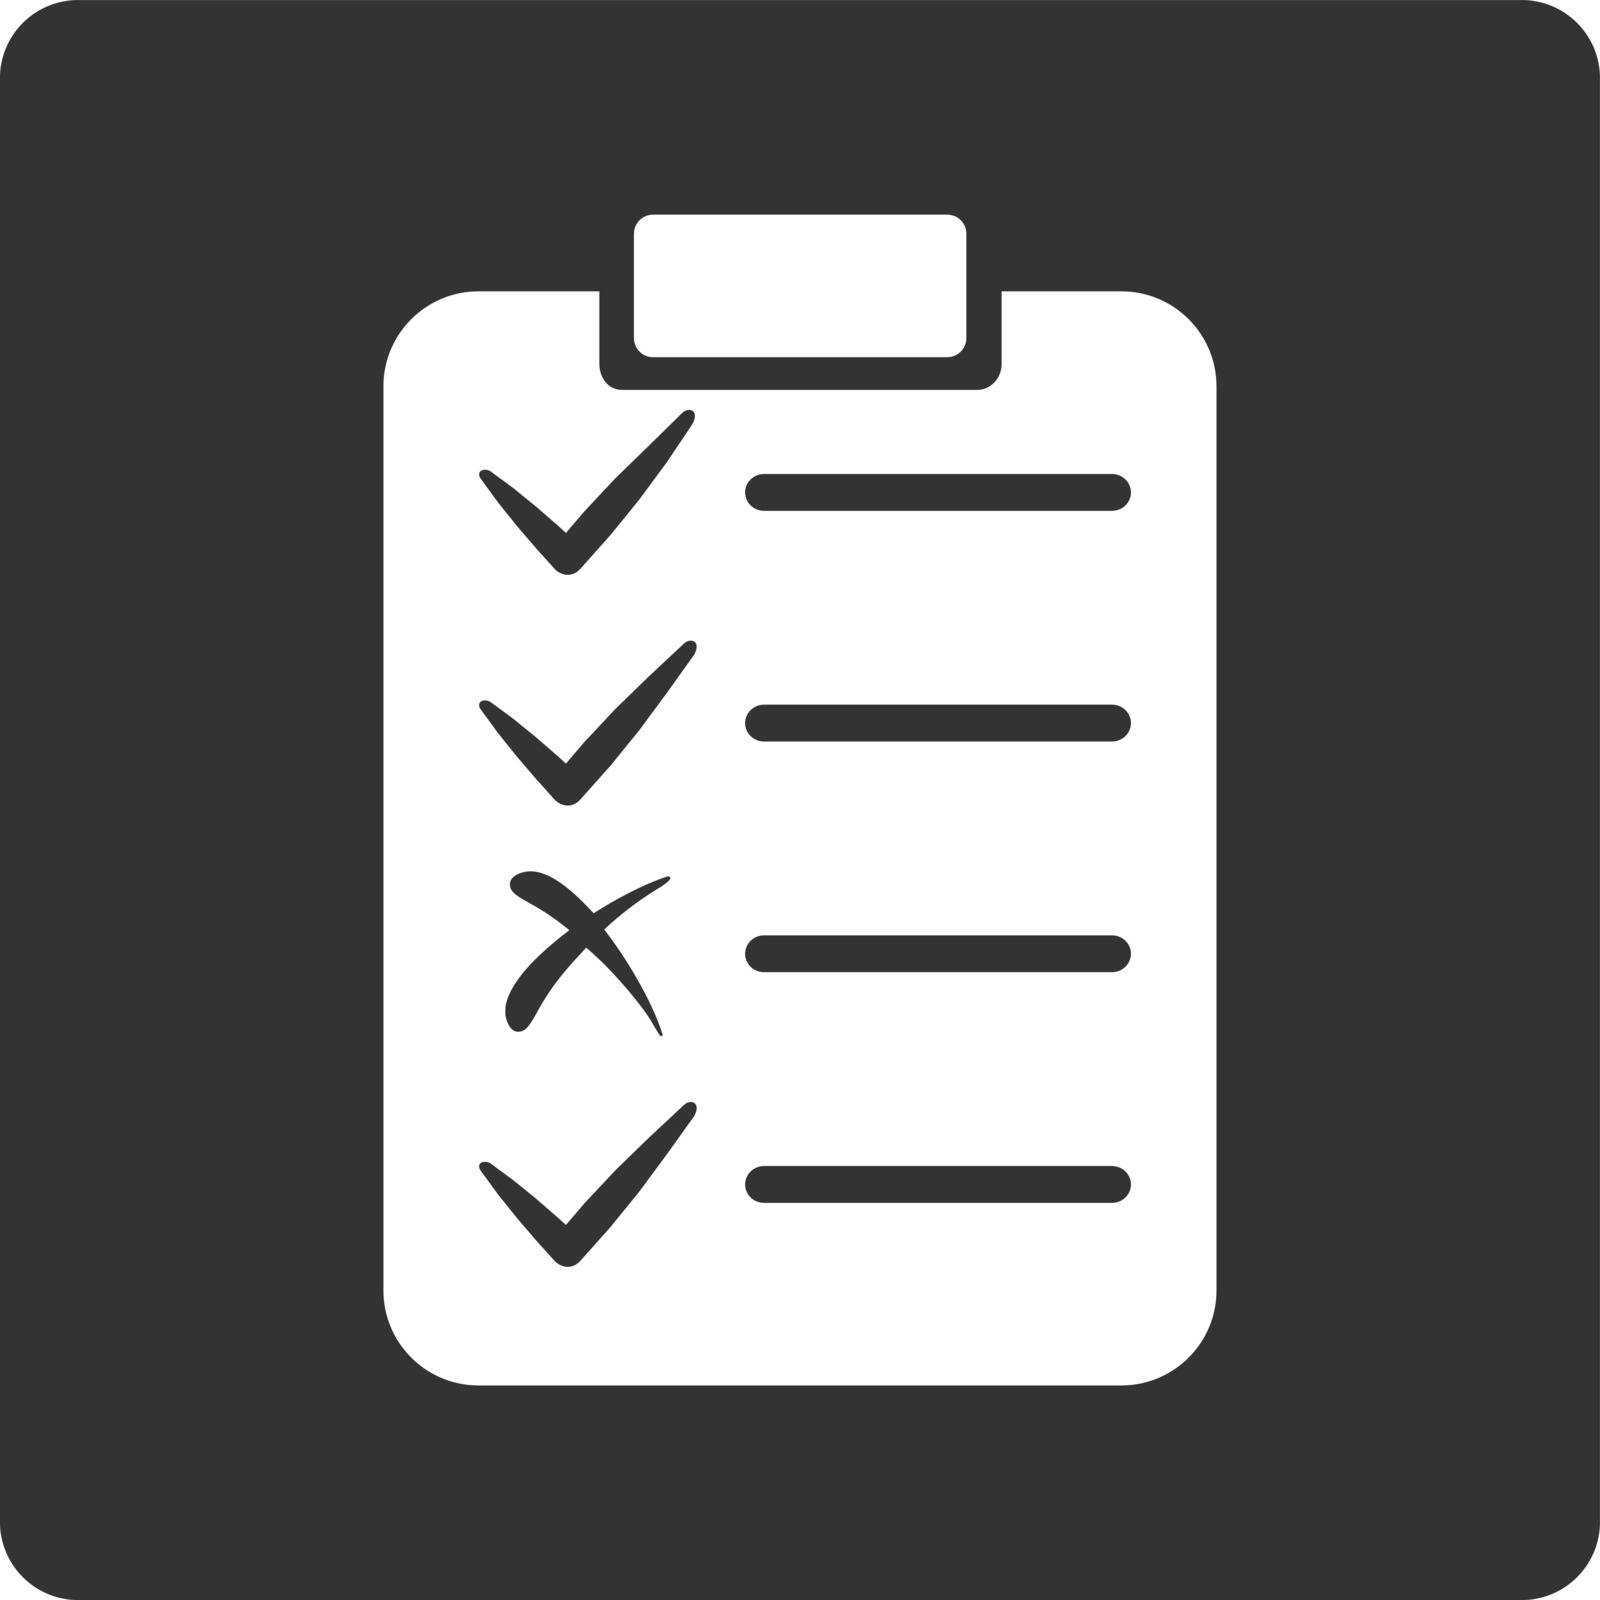 Task List icon. Vector style is white and gray colors, flat square rounded button, white background.